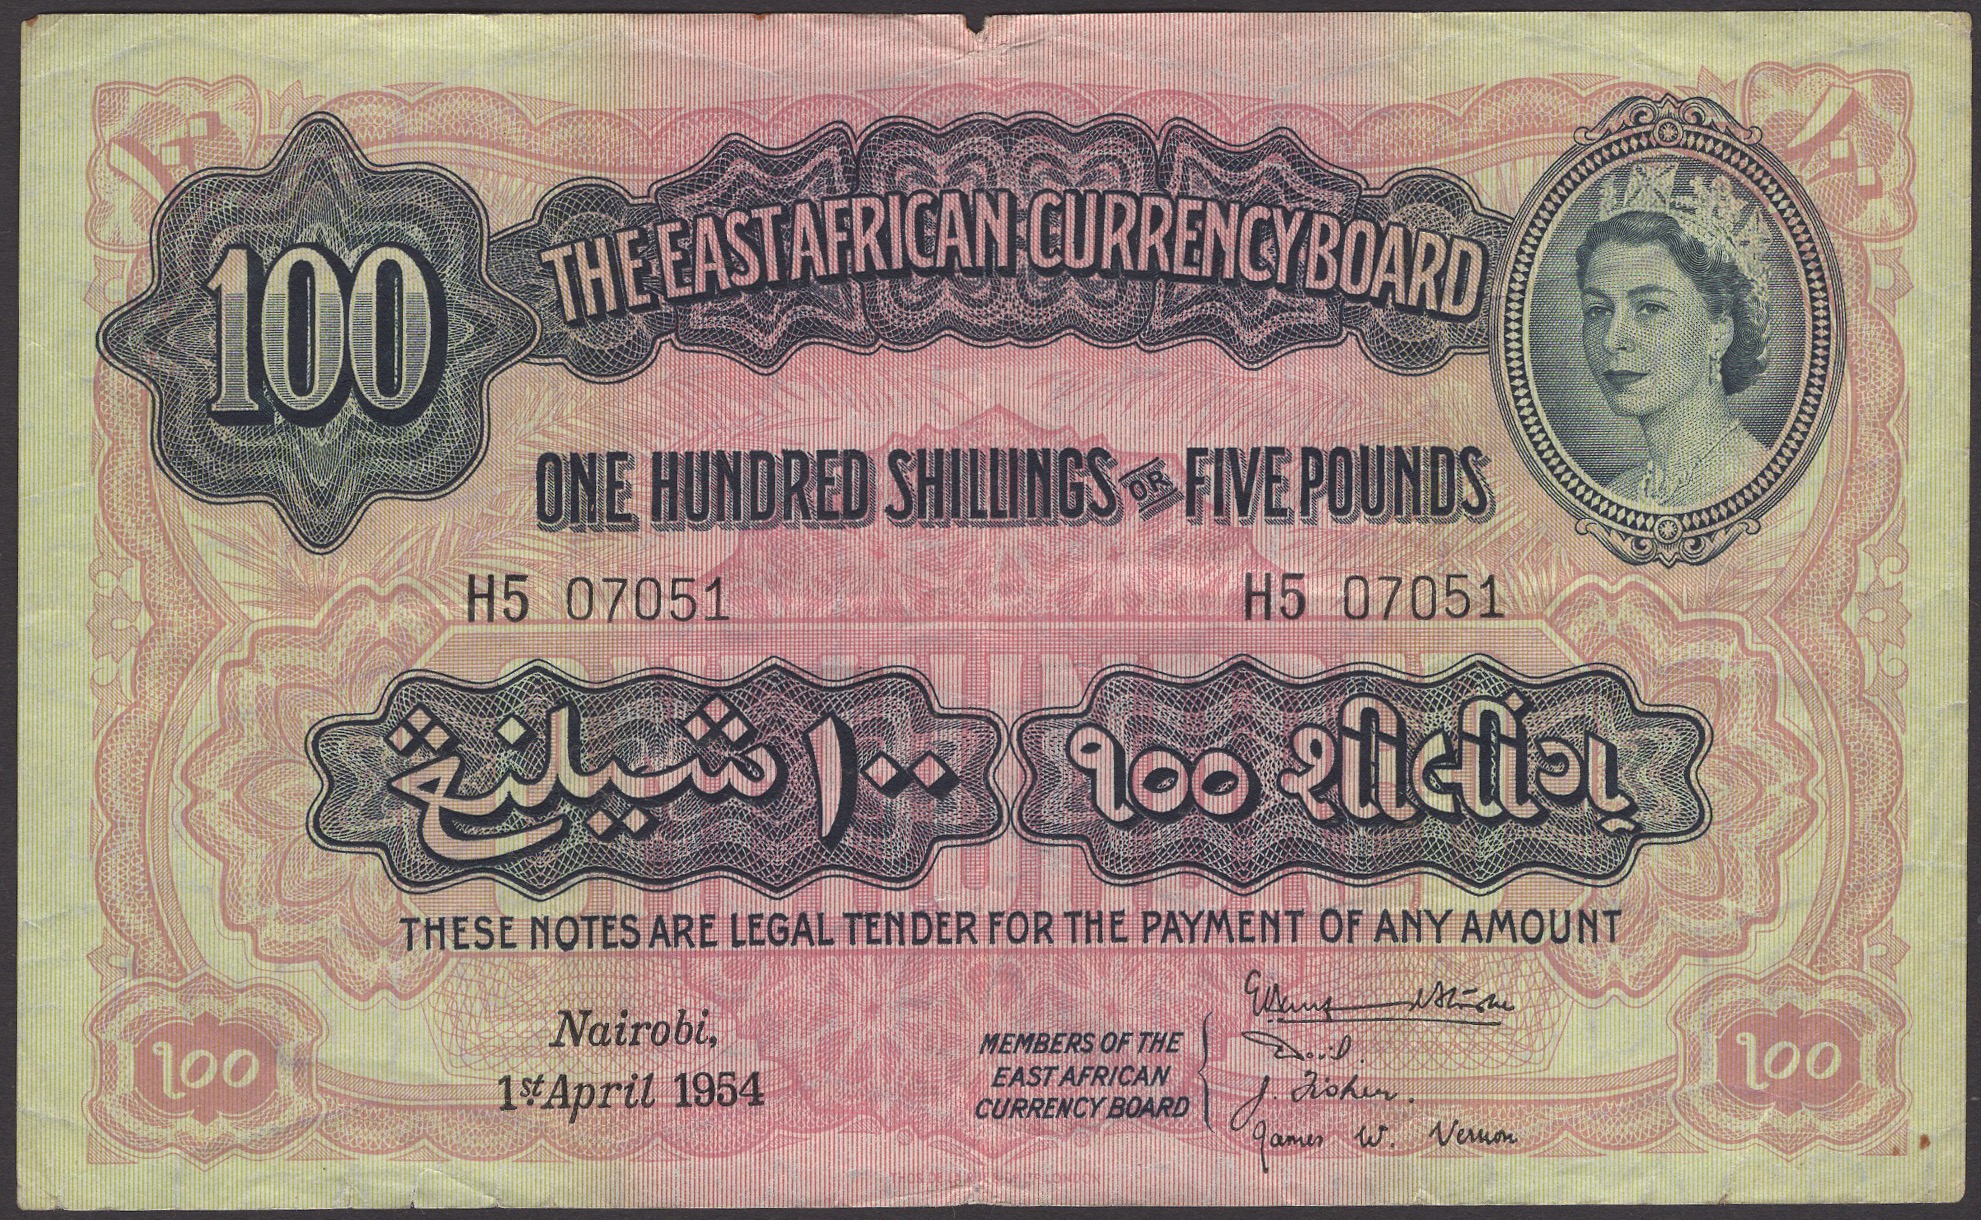 East African Currency Board, 100 Shillings, 1 April 1954, serial number H5 07051, small...